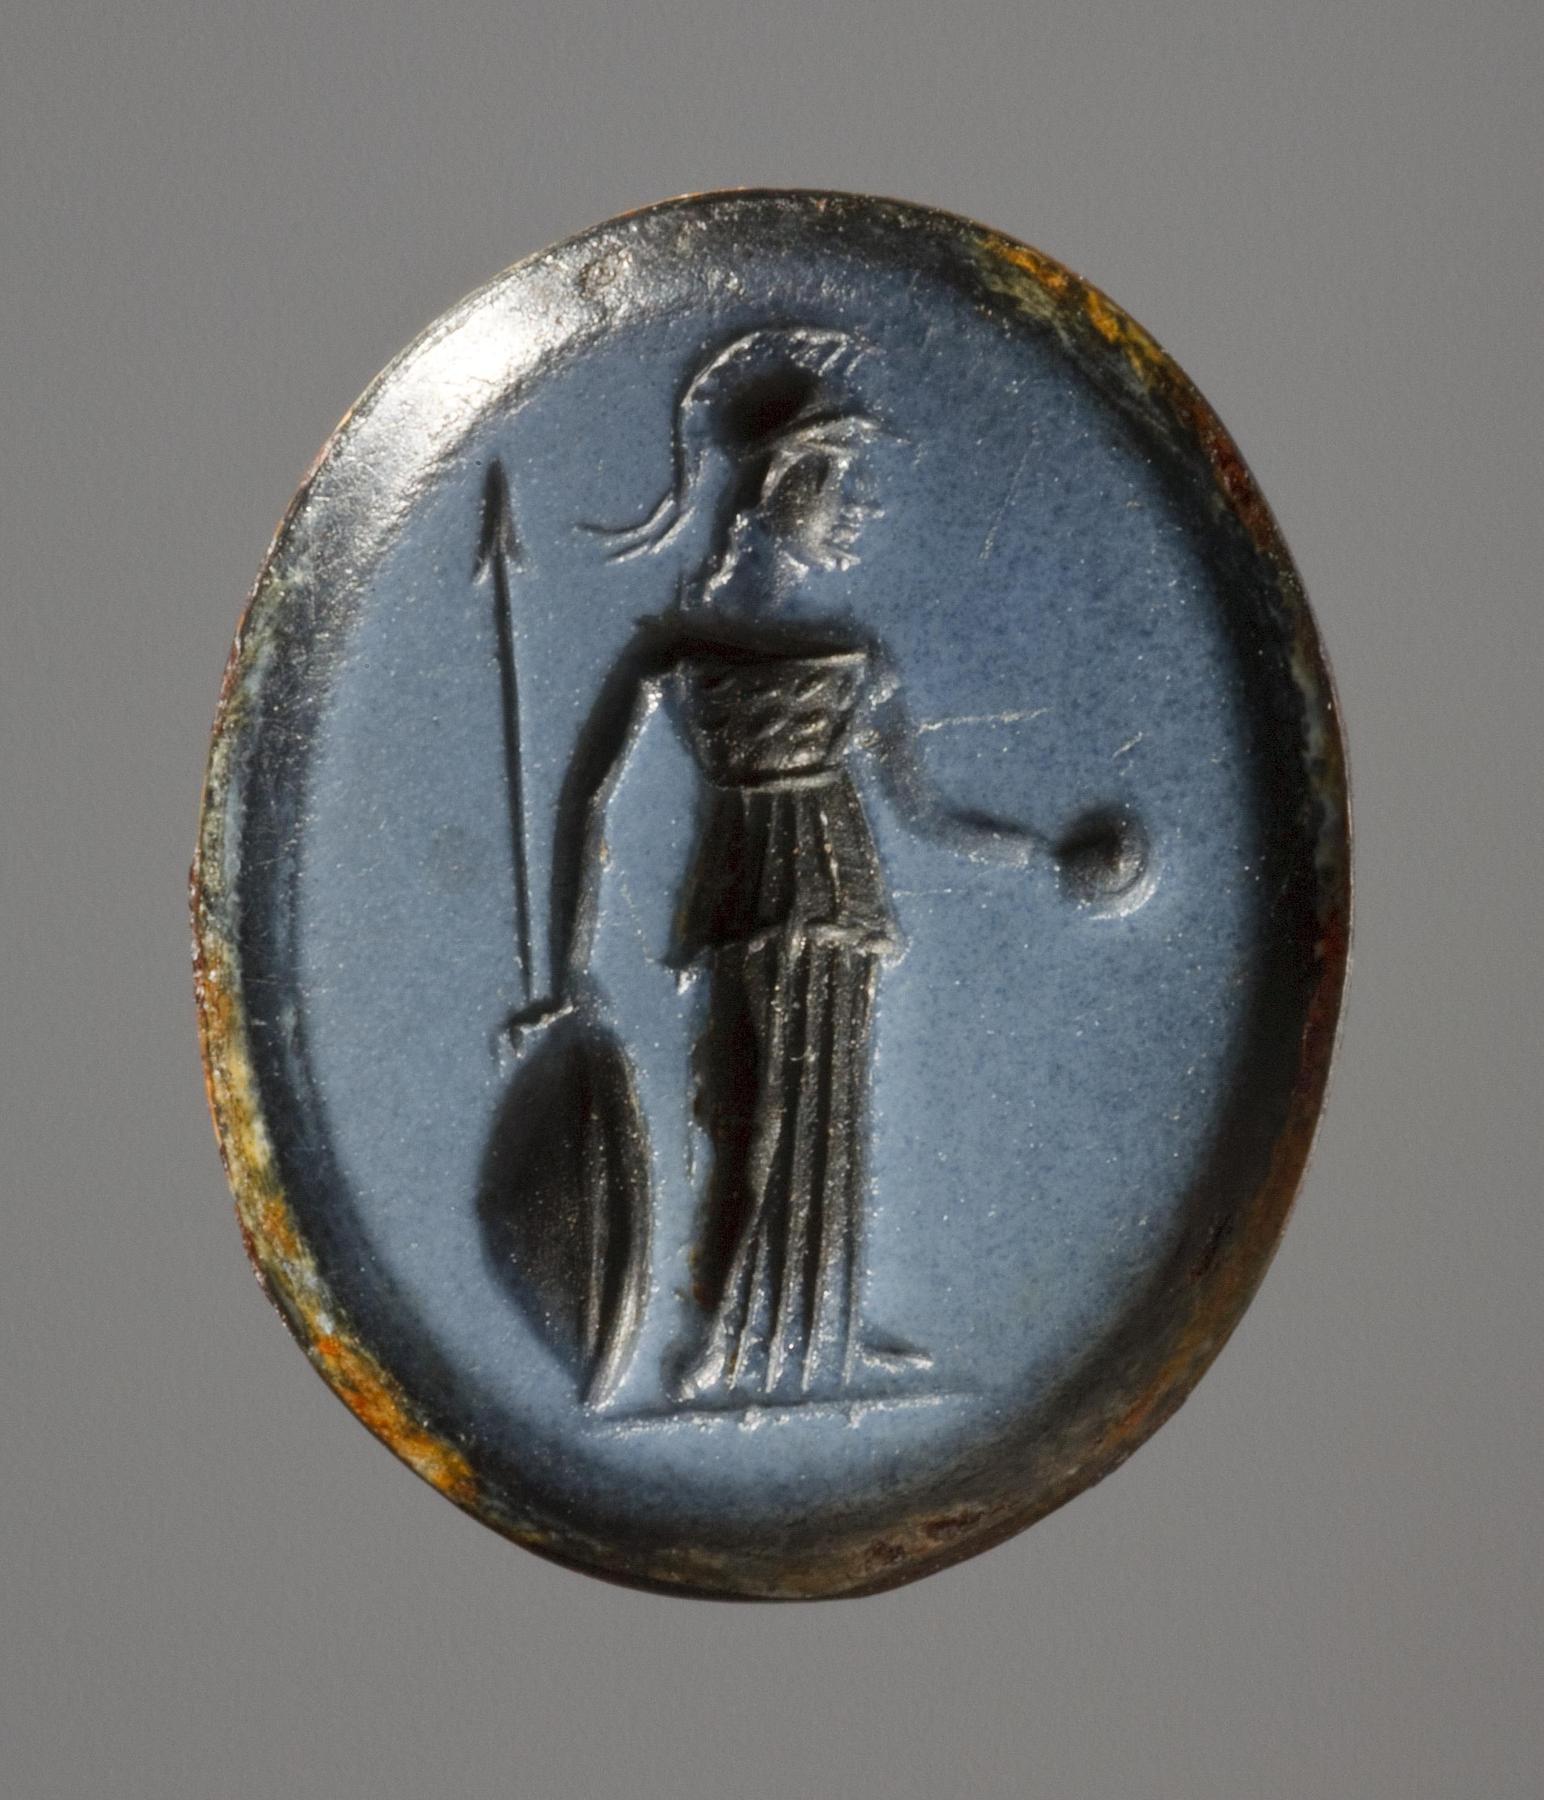 Athena with a spear, shield, and libation bowl, I231